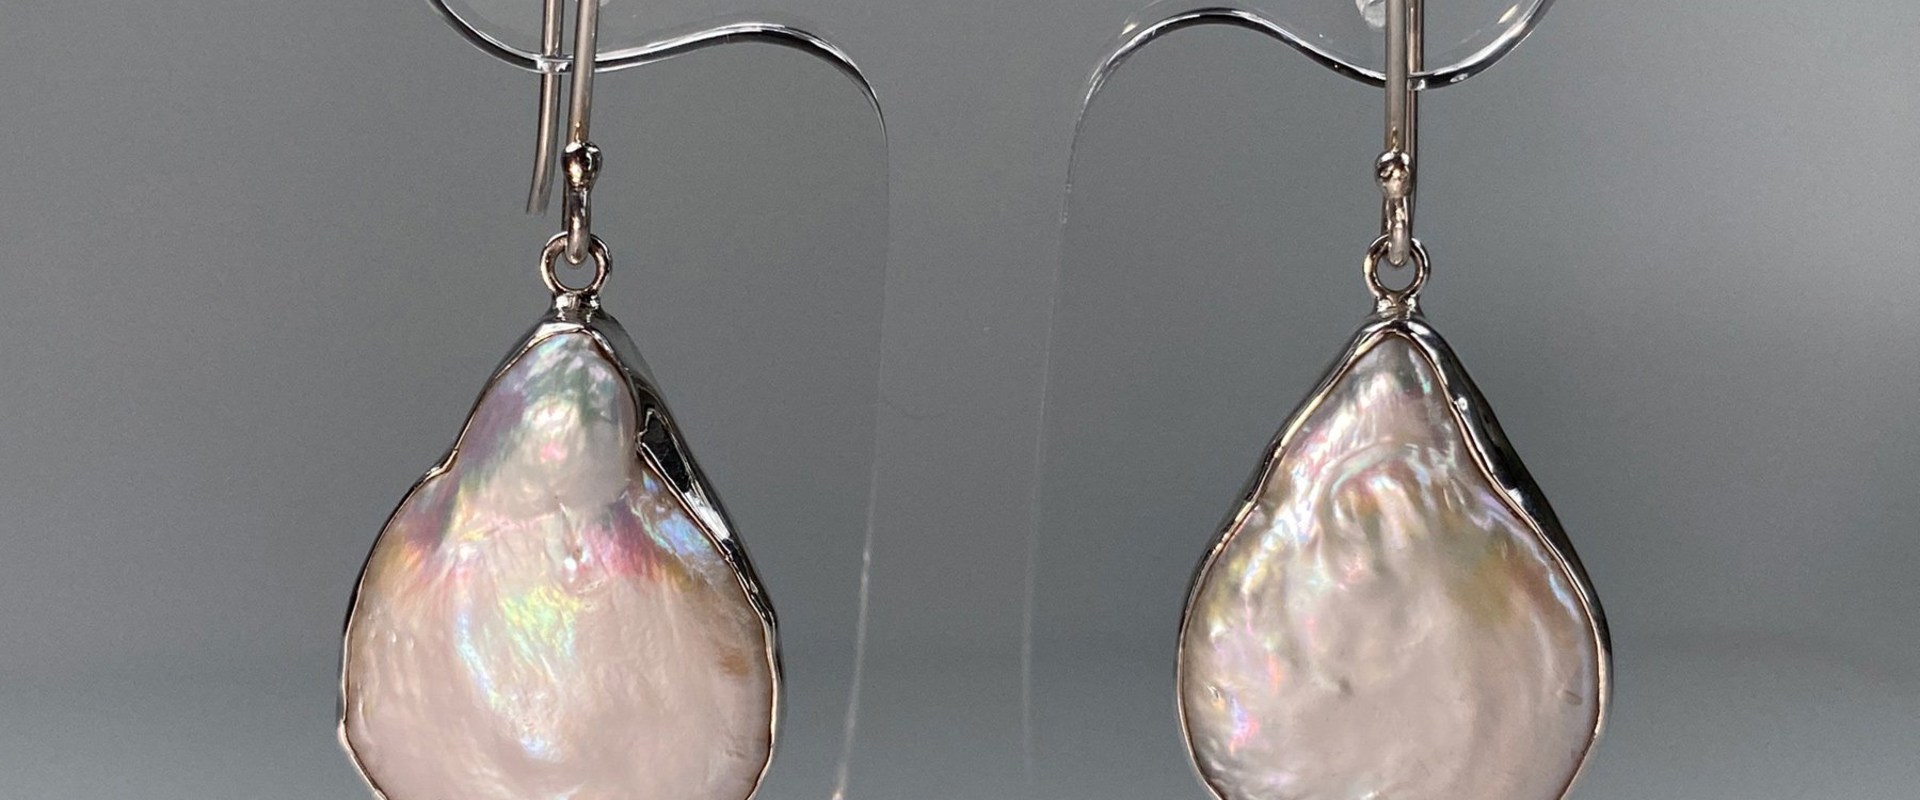 Pearl Earrings - A Comprehensive Overview